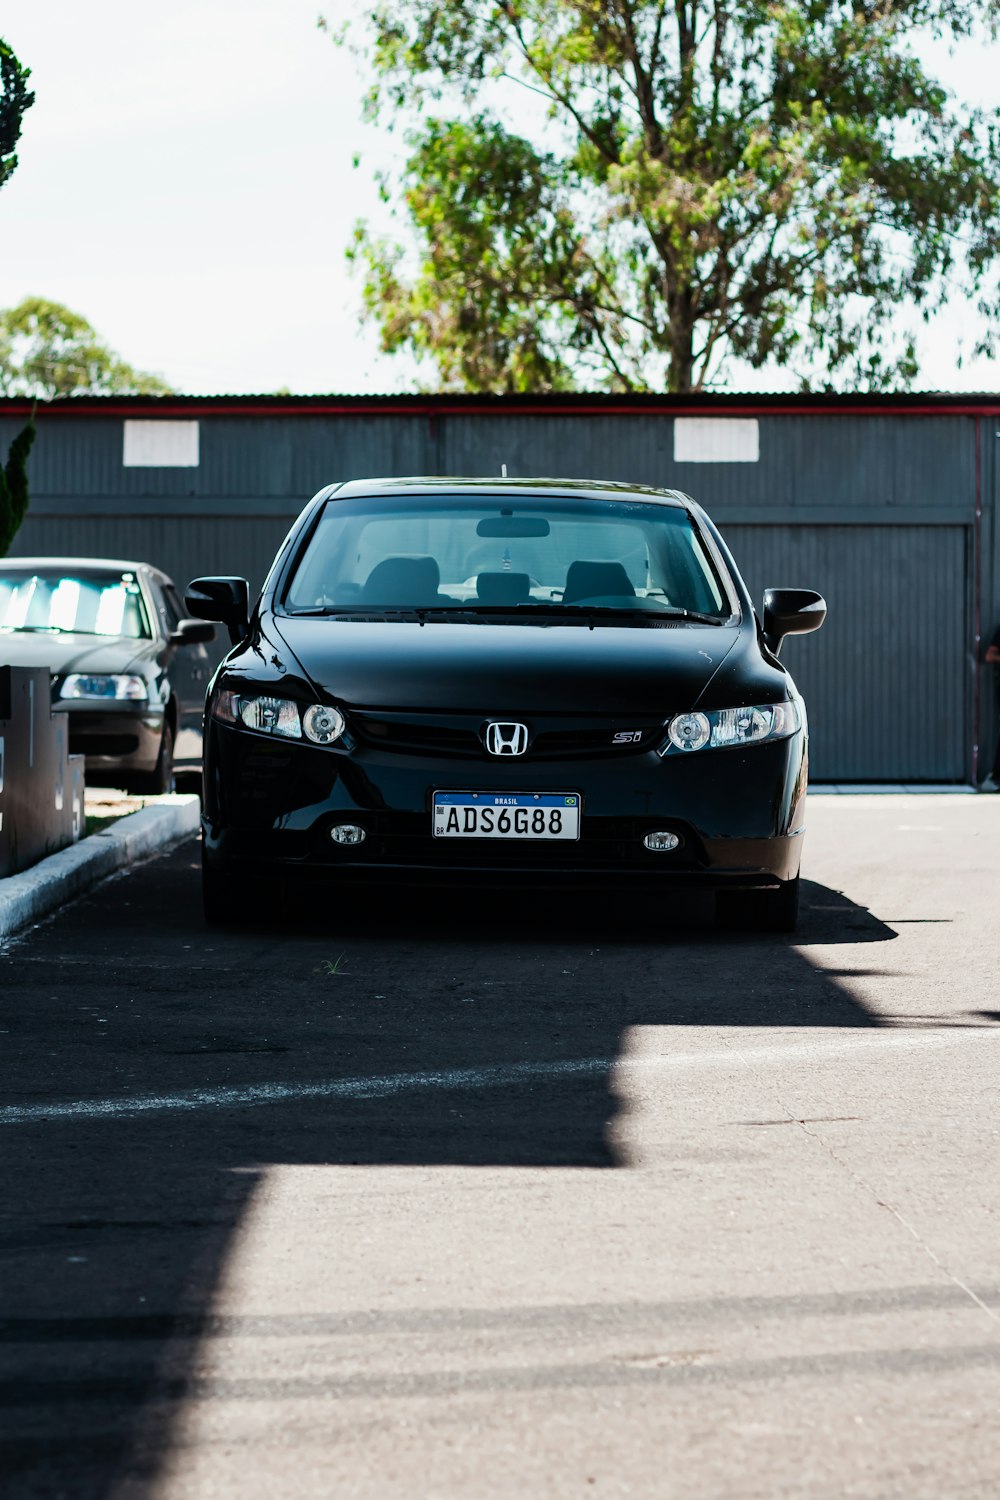 a black car parked in a parking lot next to a parking meter